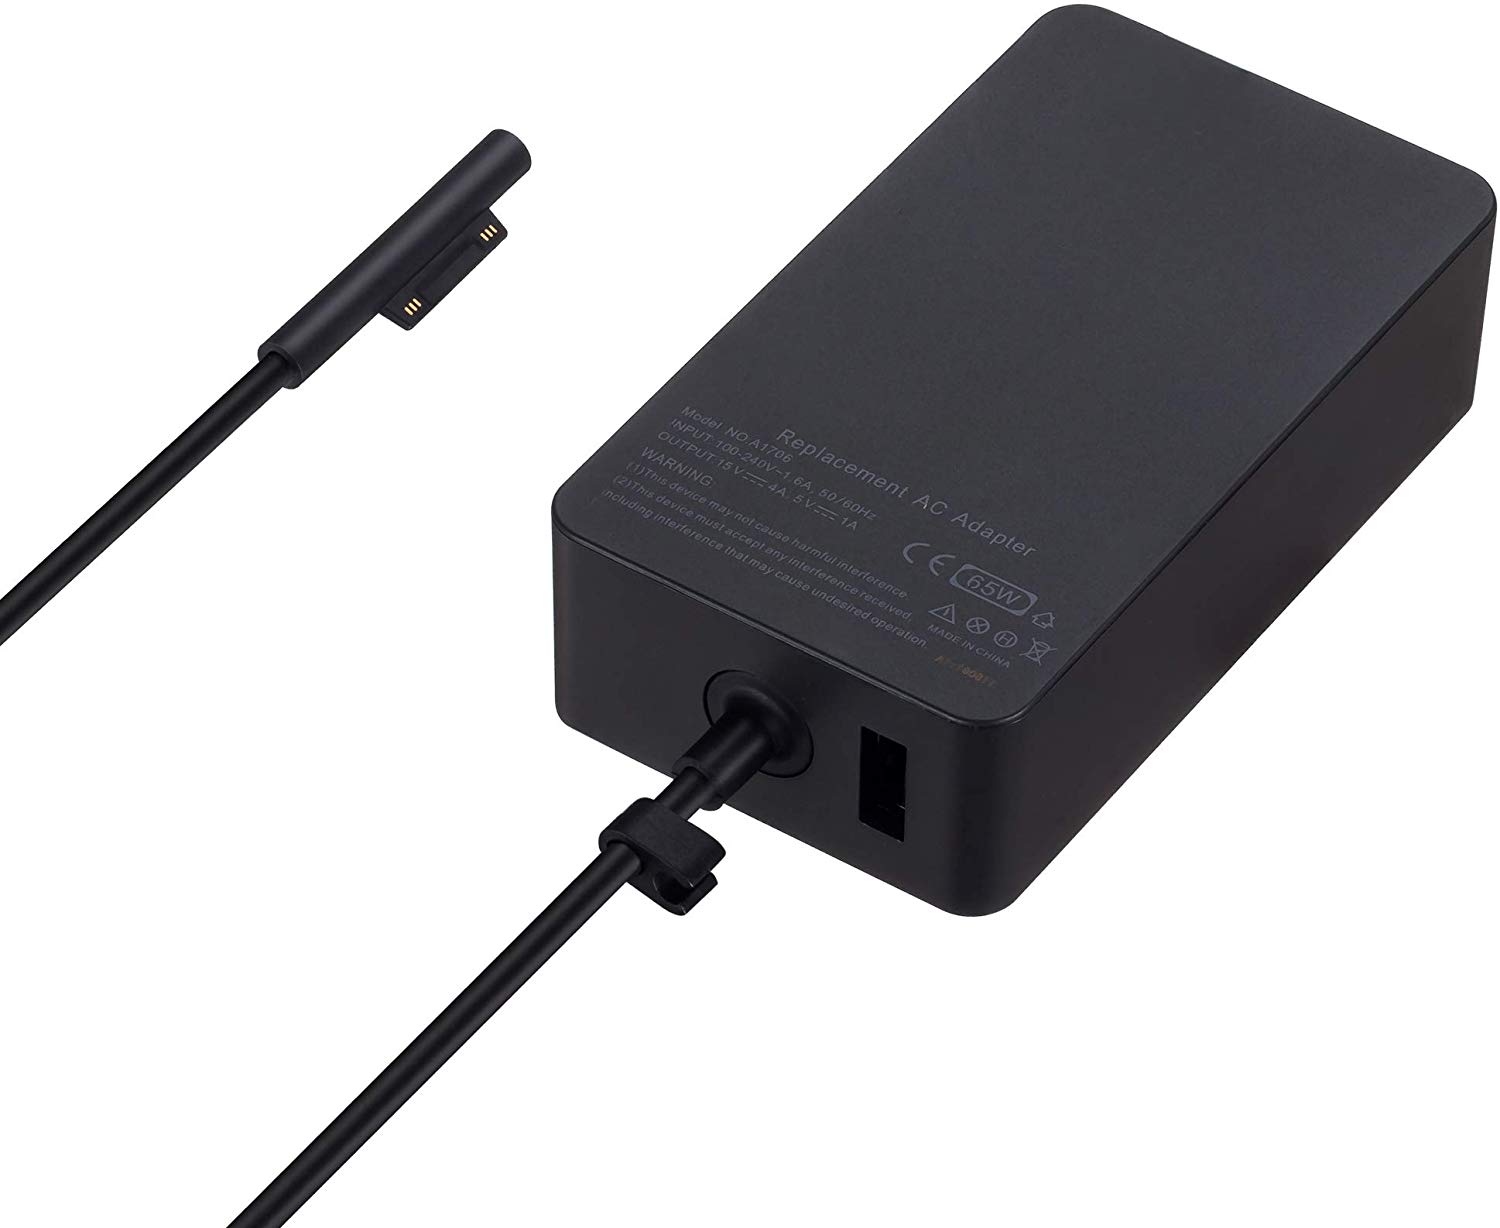 HF-SPPA-65w154: Surface Pro Charger 15V 4A 65W for Surface Pro 7/6/5/4/3/X,Surface Book 1/2,Surface Laptop,Surface Go w/ 5V/1A USB 1706